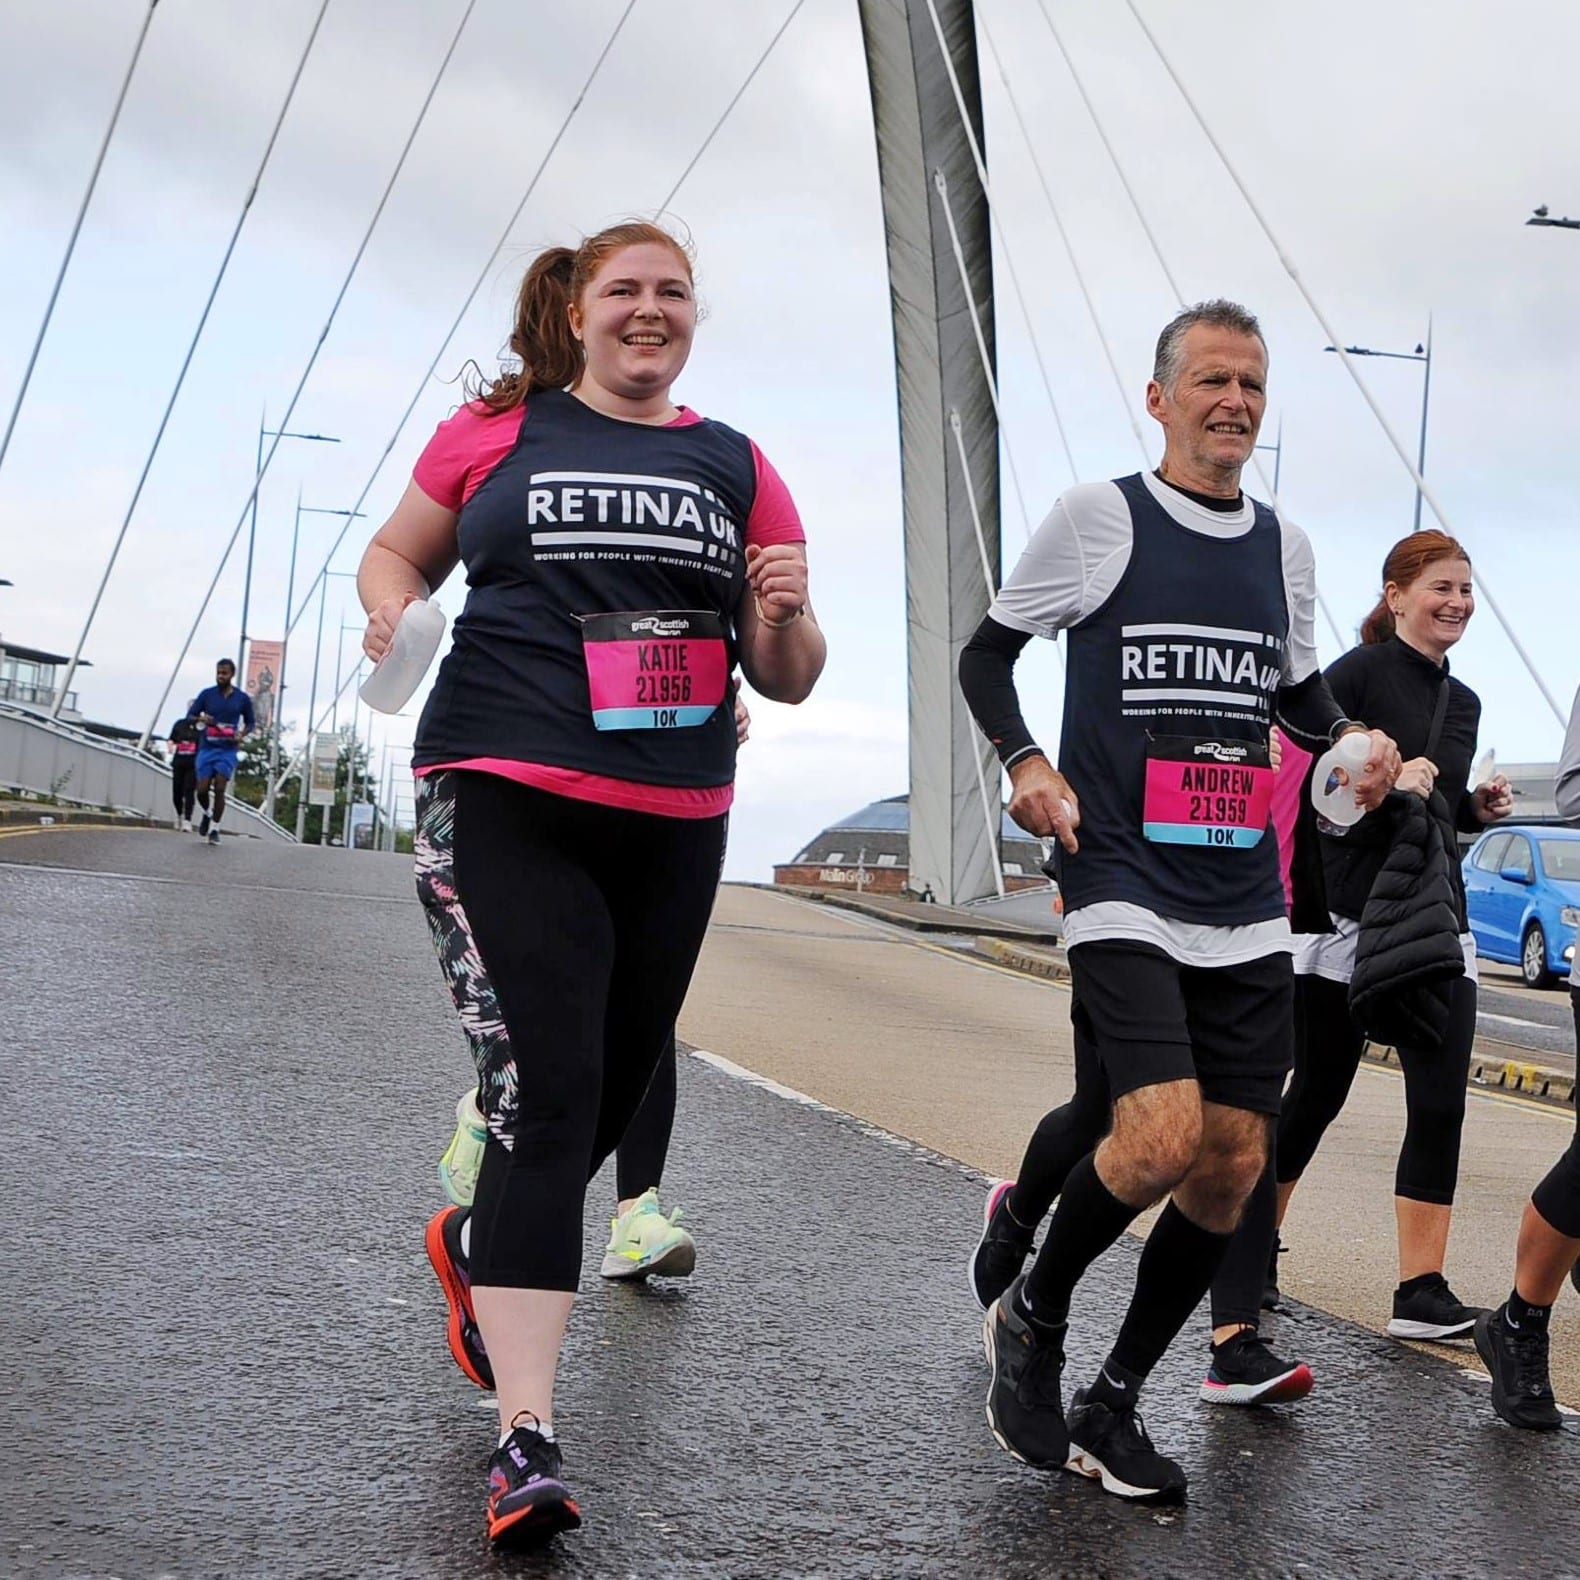 Image shows two runners running along a path. Both are wearing blue Retina UK running vests and pink 10K running numbers.